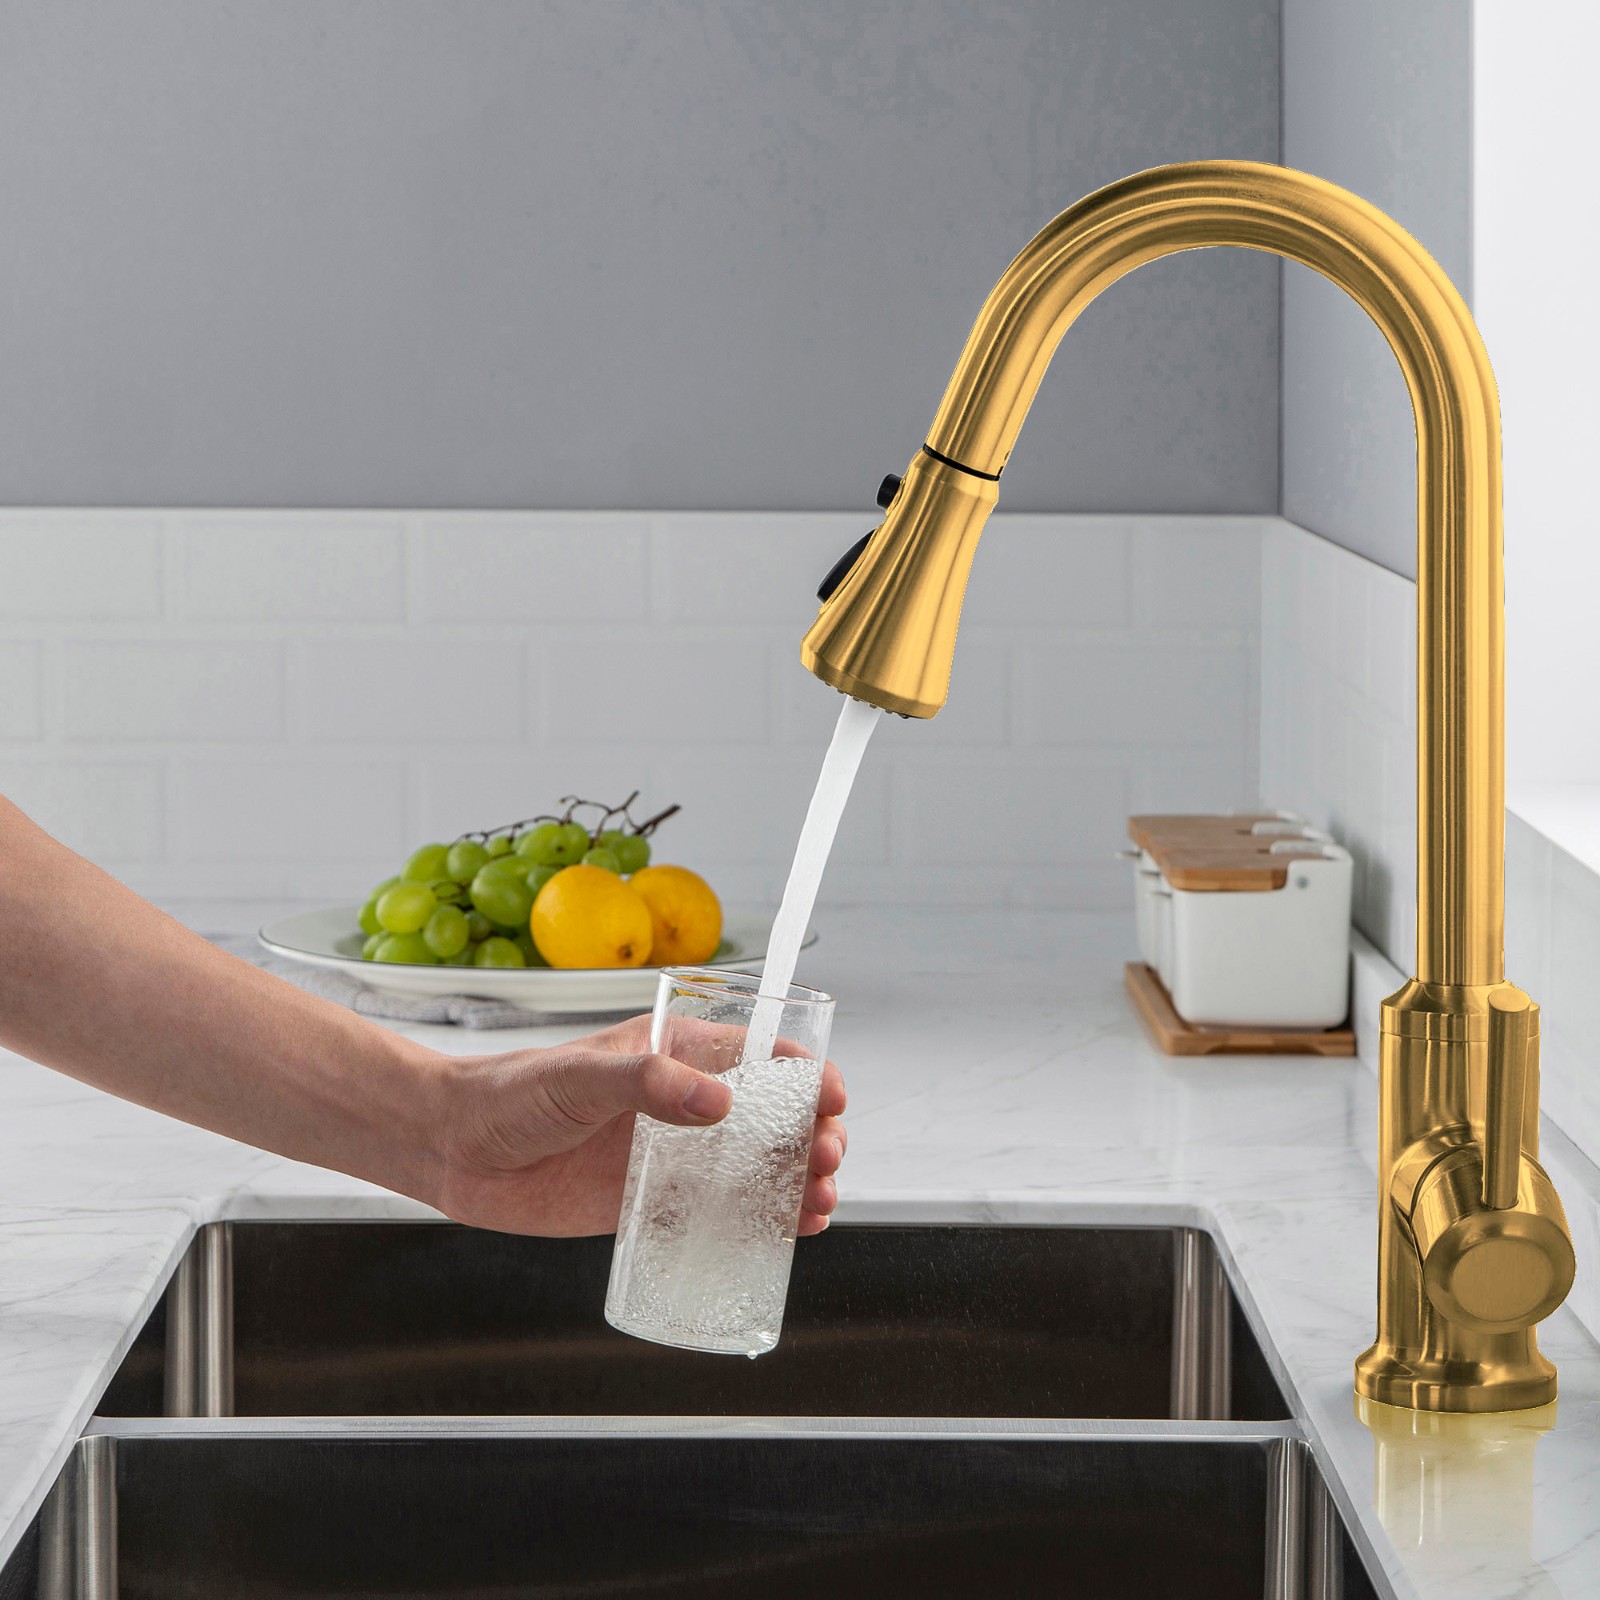  WOODBRIDGE WK101201BG Stainless Steel Single Handle Pull Down Kitchen Faucet in Brushed Gold Finish._4994